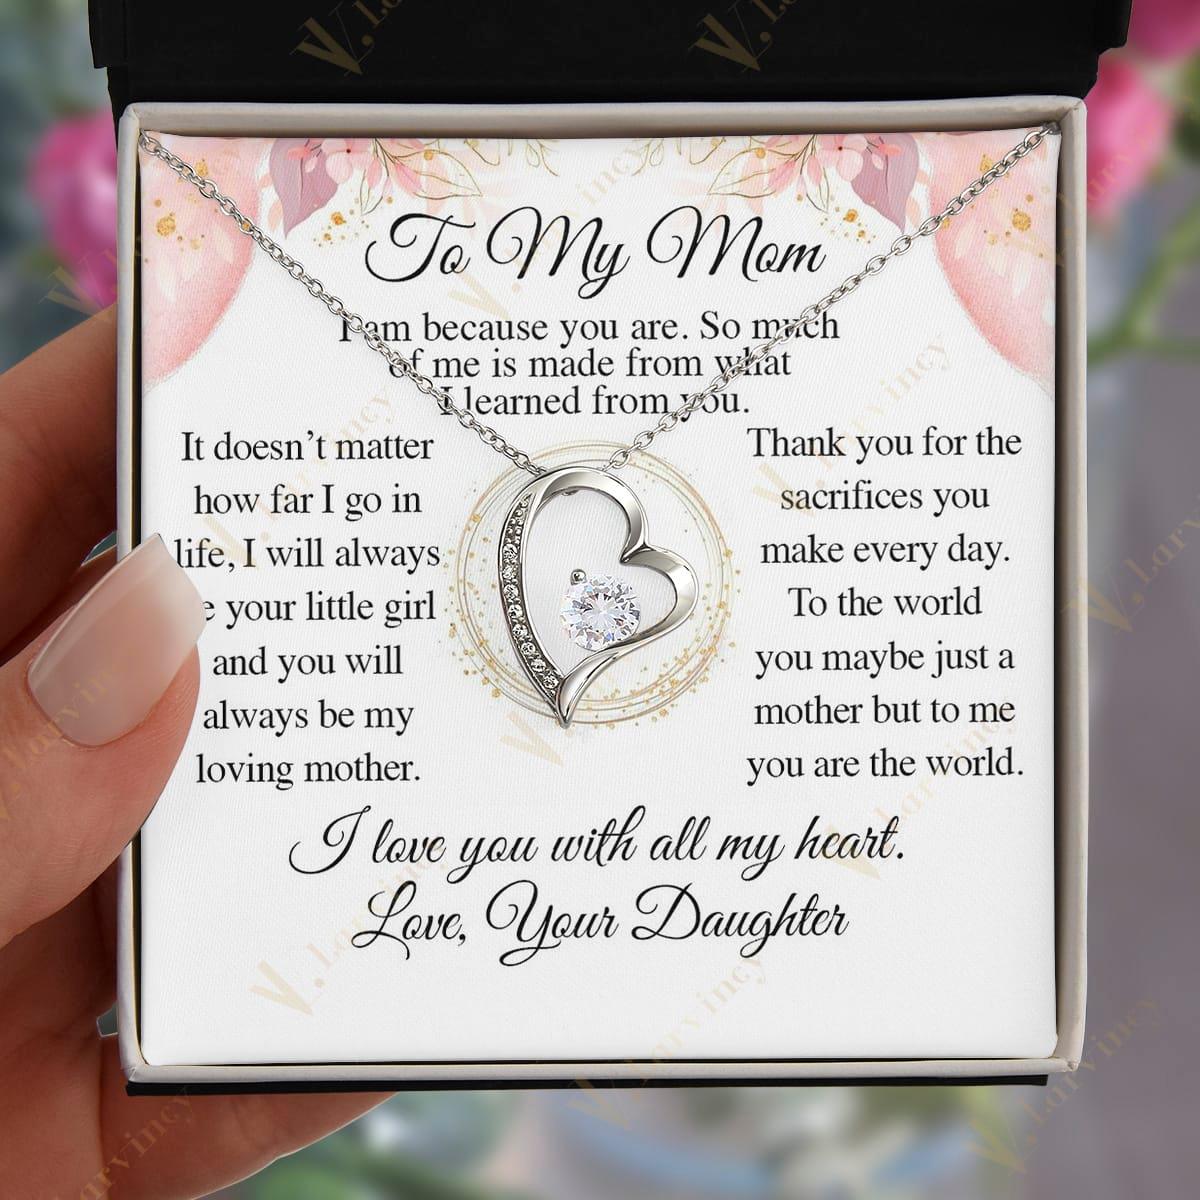 Mom Necklace Gifts From Daughter, Love Necklace For Mom, Jewelry For Mom Gifts From Daughter Necklace With Gift Box Personalized Message Card, Thank You Mom - Larvincy Jewel